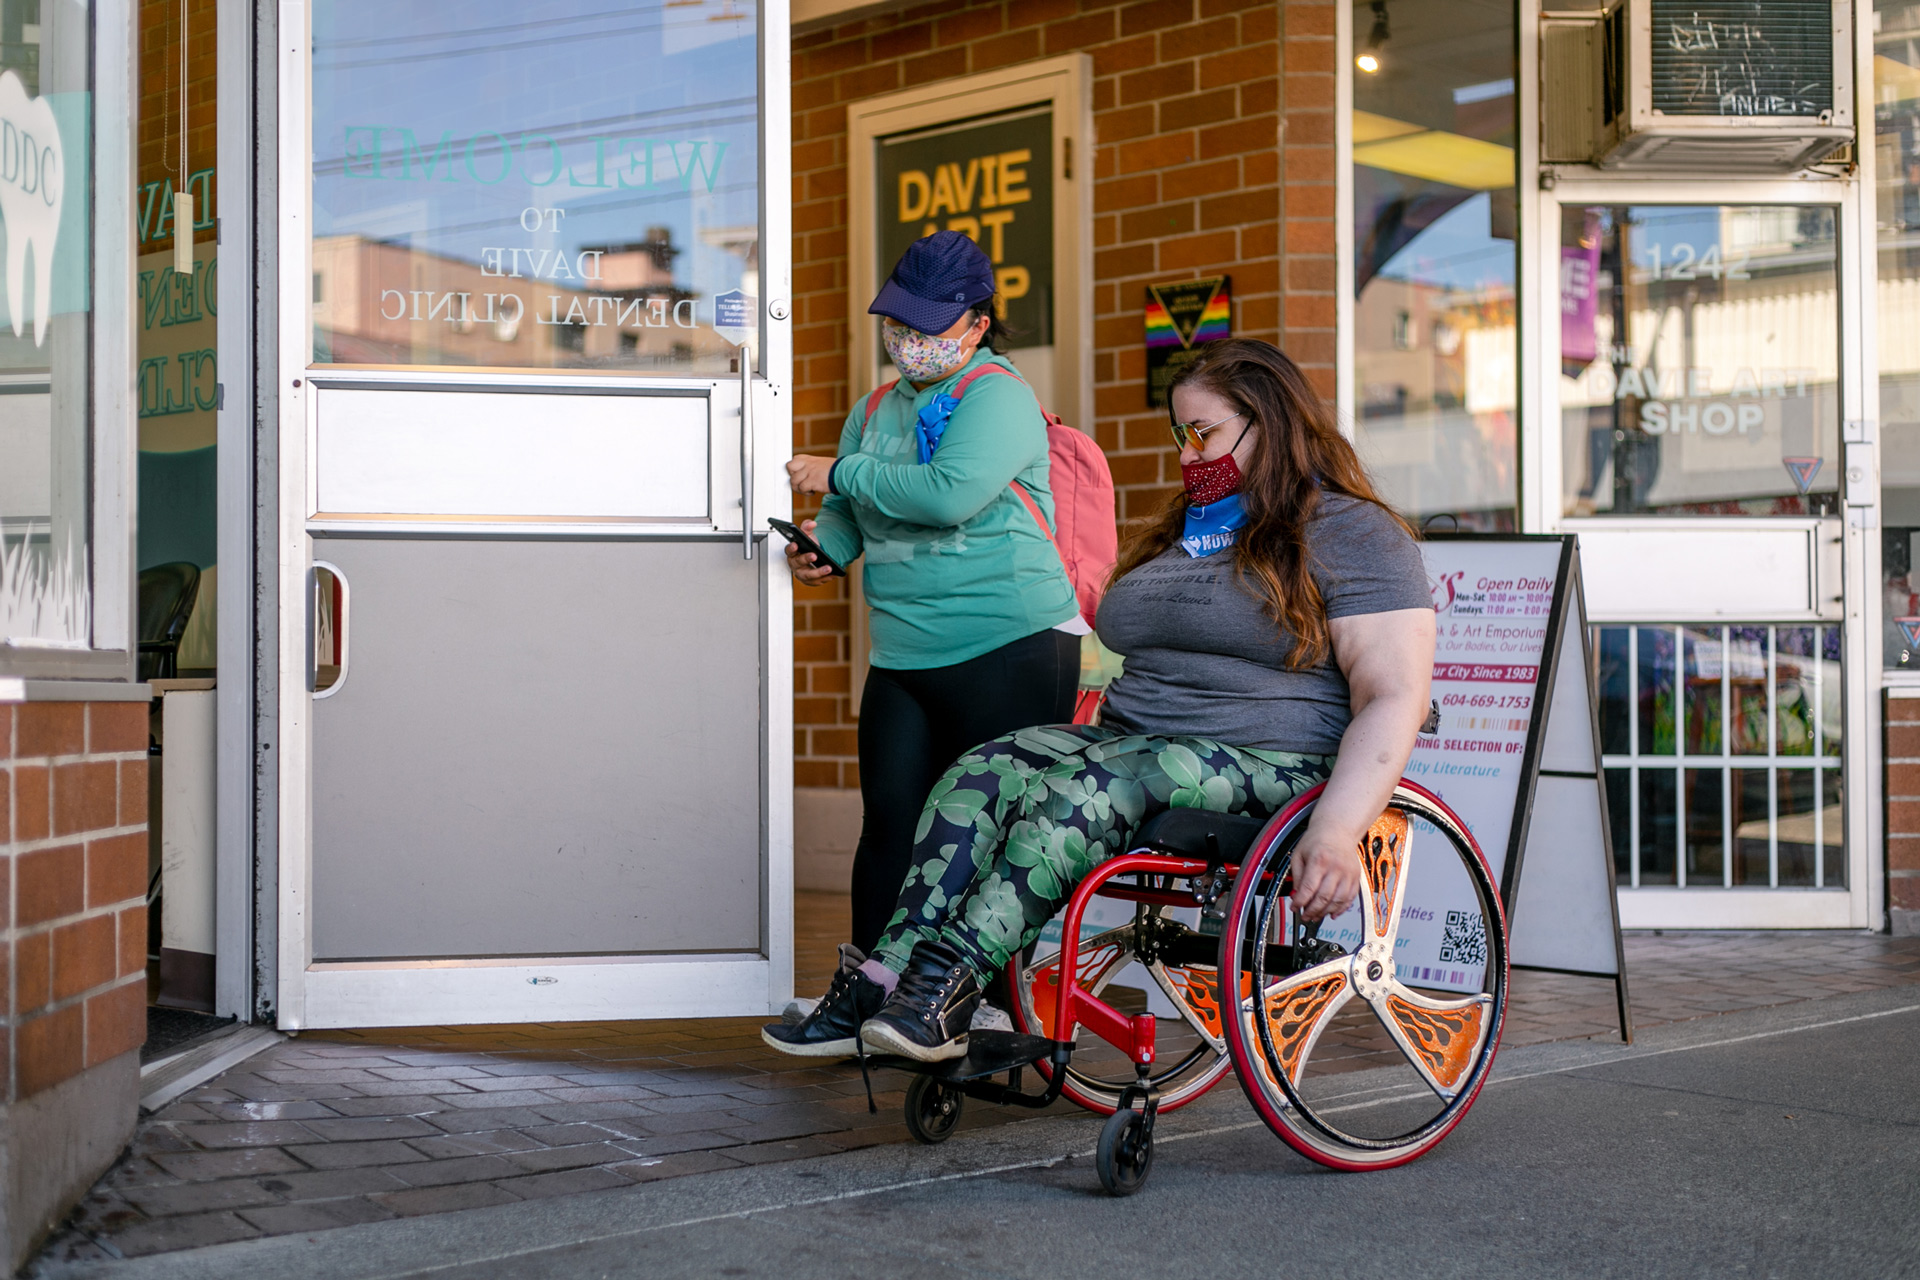 a woman in a powerwheelchair with cool orange rims and colourful leggings enters through a door being held open by someone standing